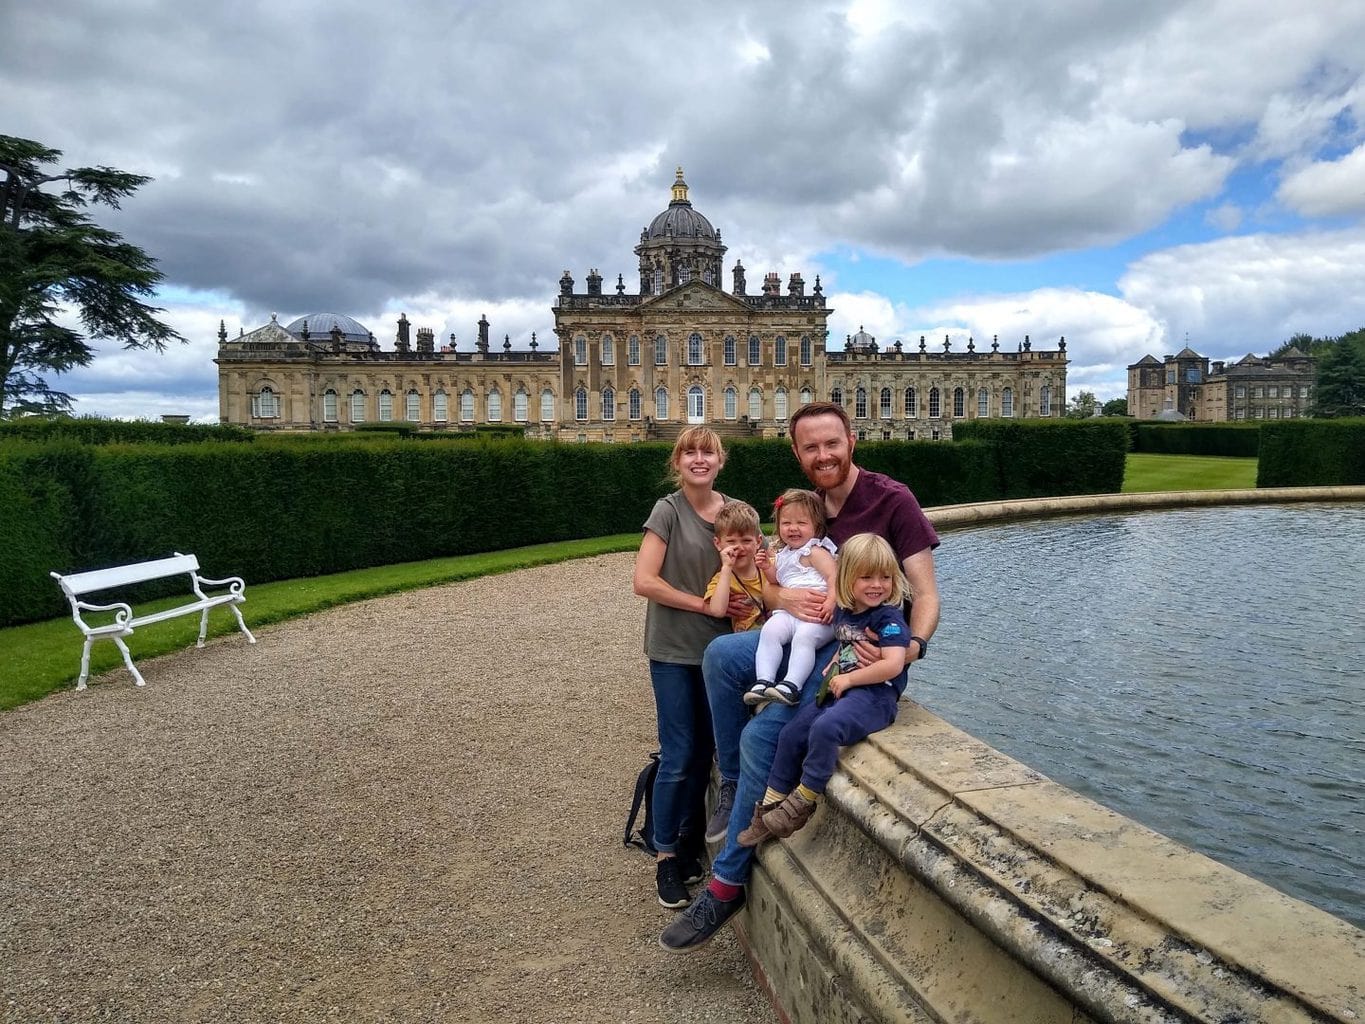 A wonderful family day out to Castle Howard